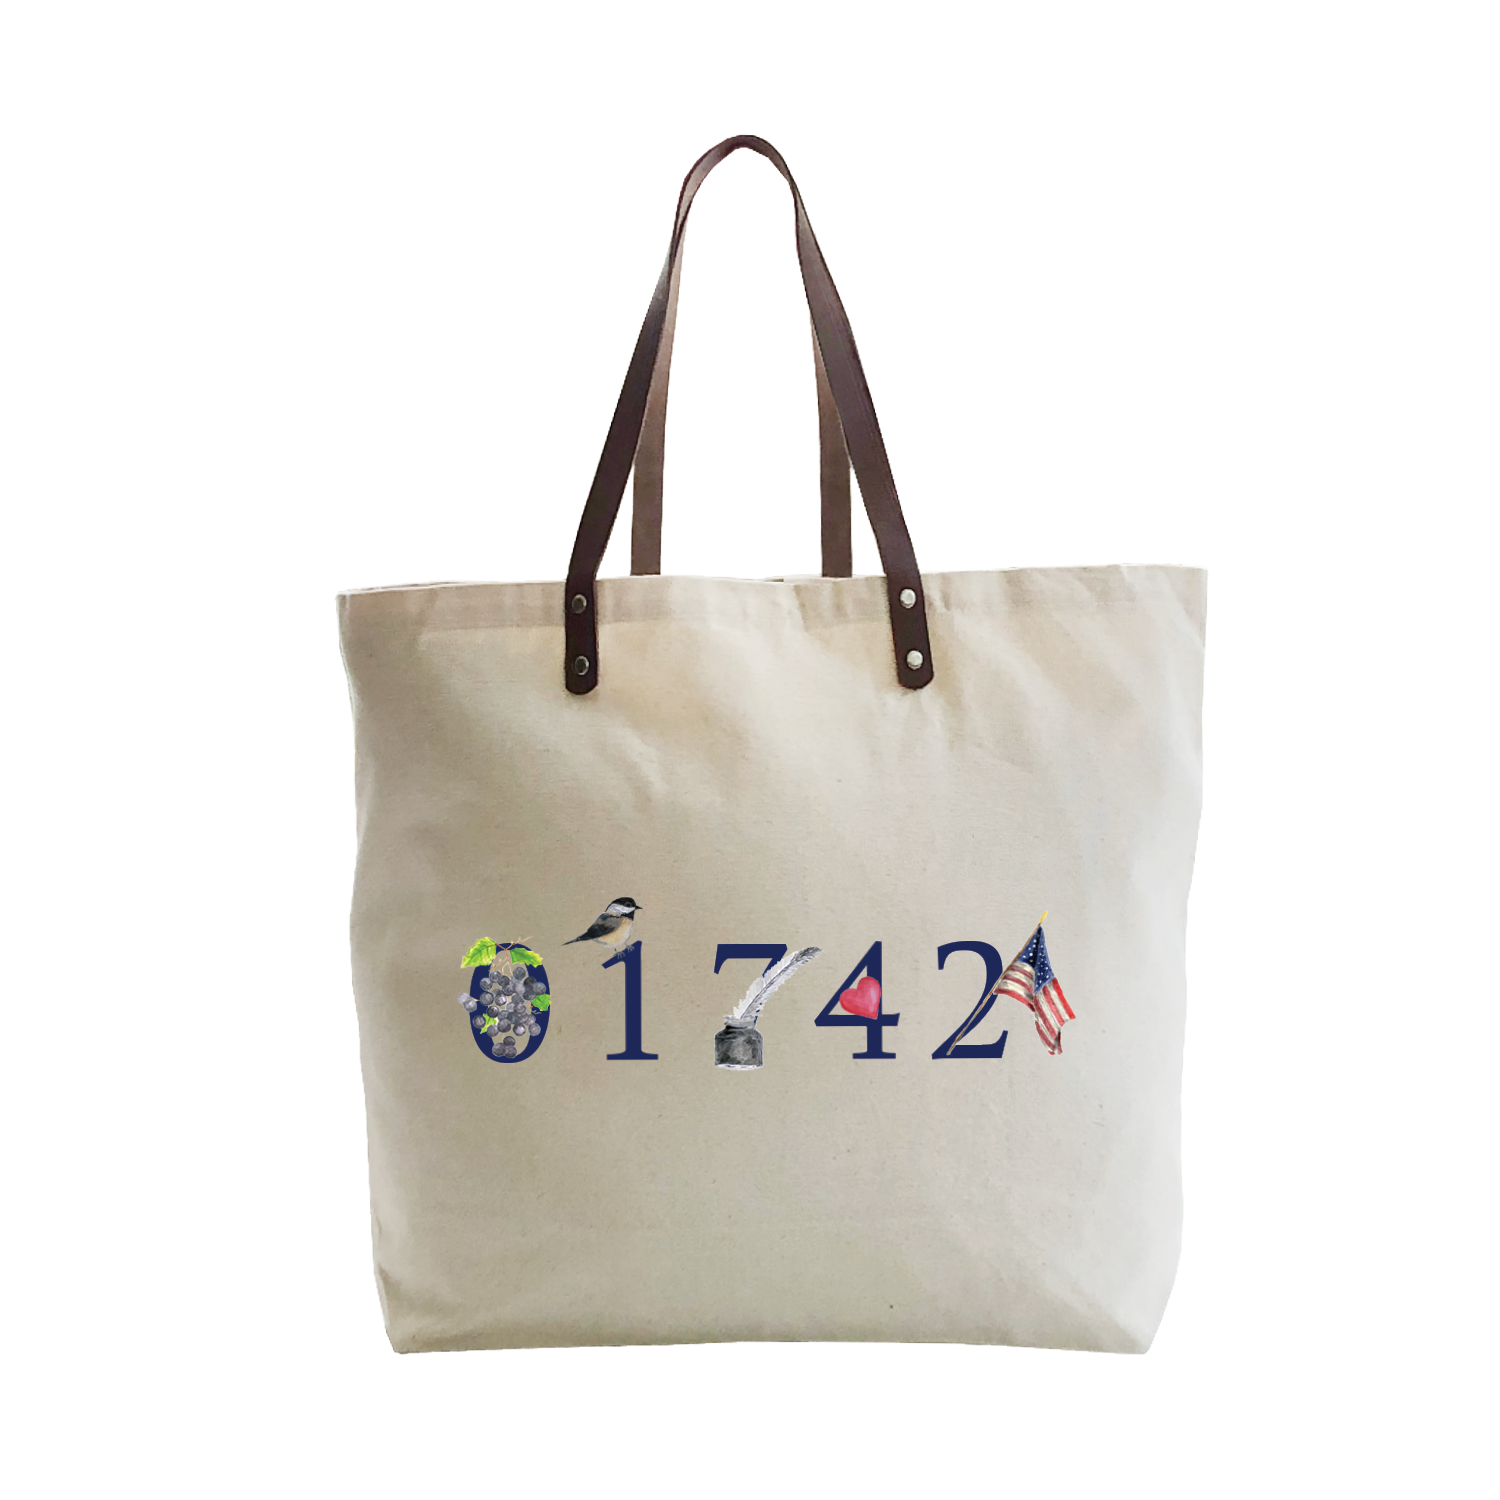 concord zip code large tote